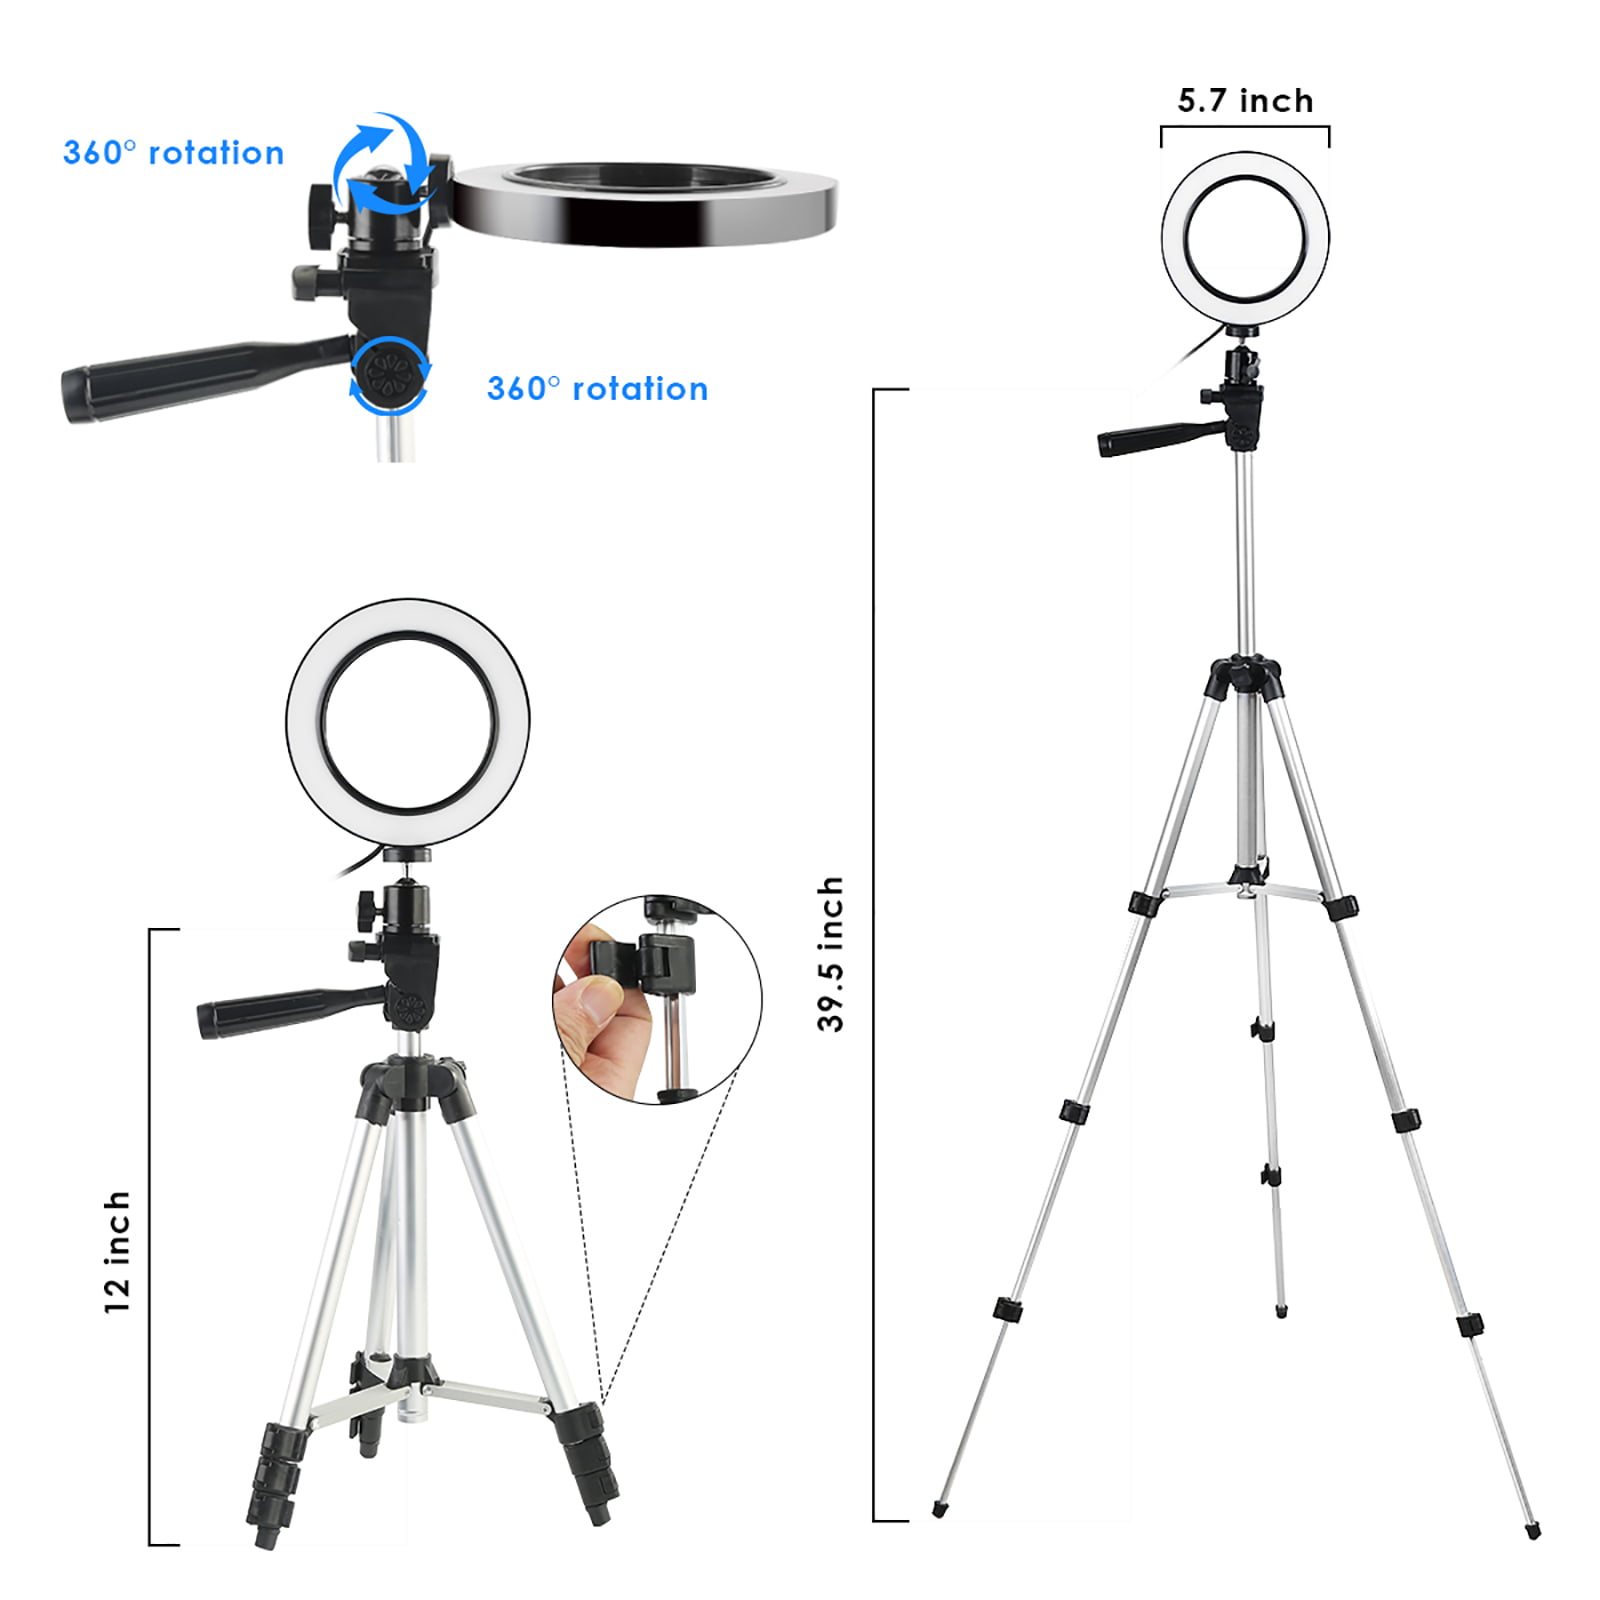 Compatible with iPhone and Android Phone Ring Light with Tripod Stand CanadianStudio LED Camera Selfie Light Ring with iPhone Tripod and Phone Holder for Video Photography Makeup Live Streaming 10” 